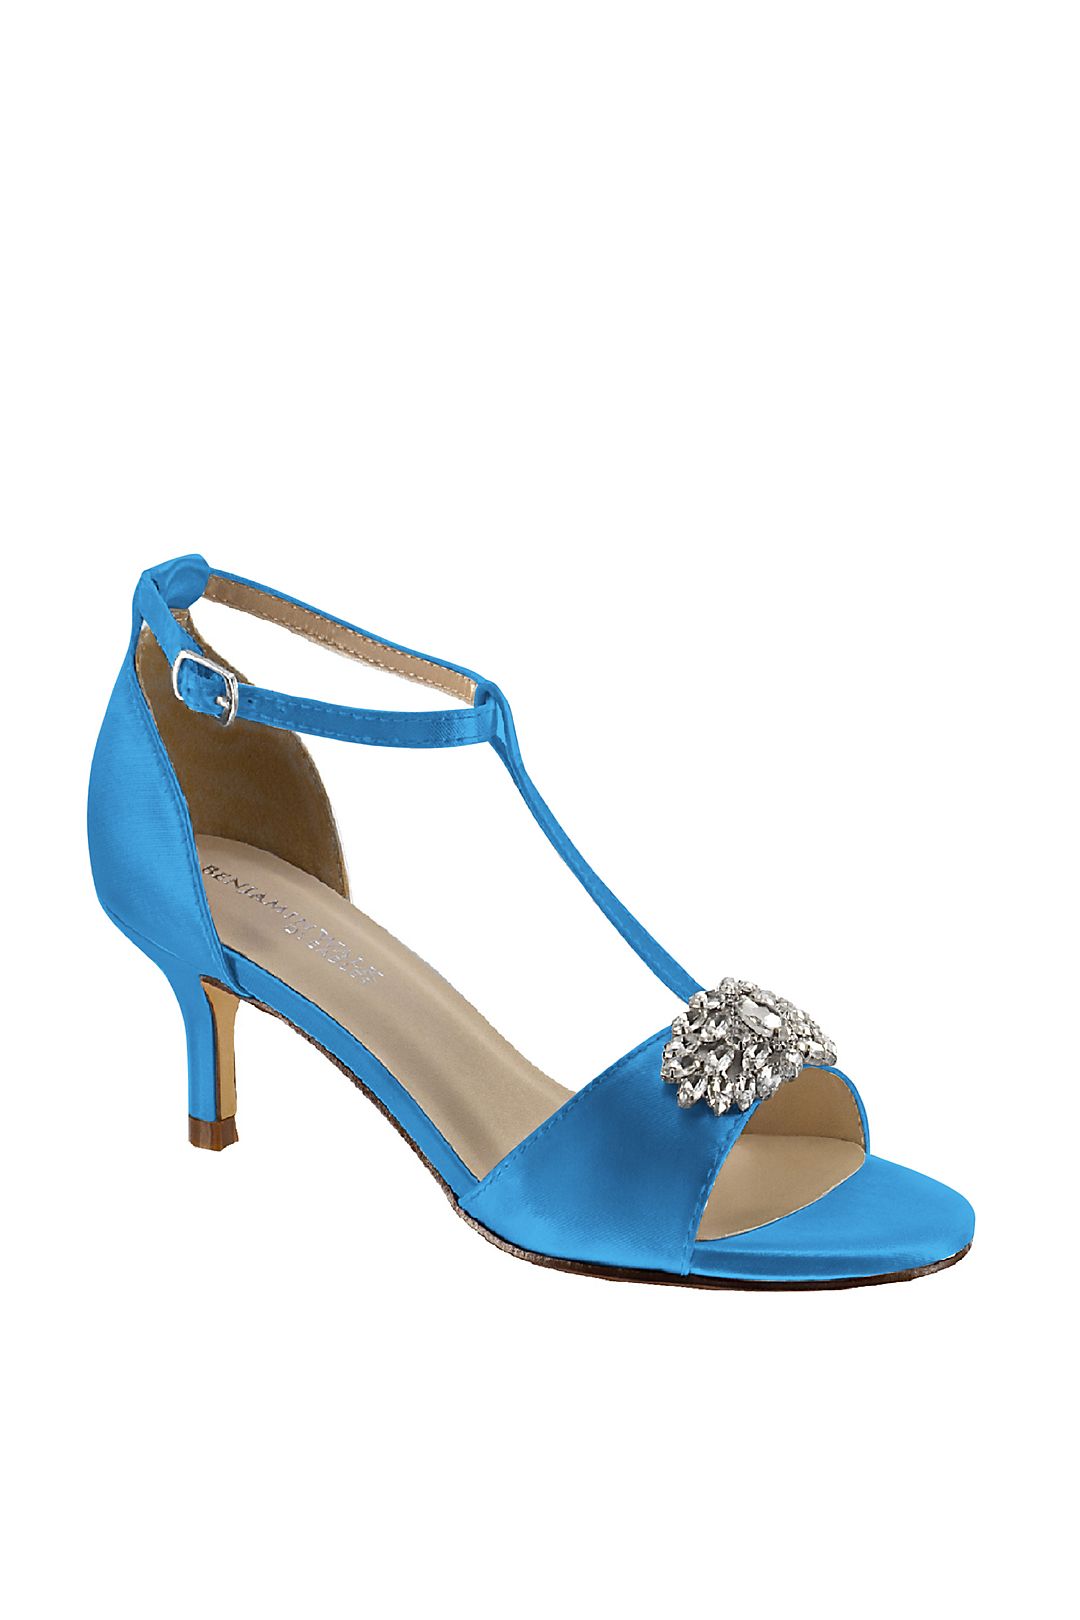 Satin T-Strap Sandals with Crystal Embellishment Image 1